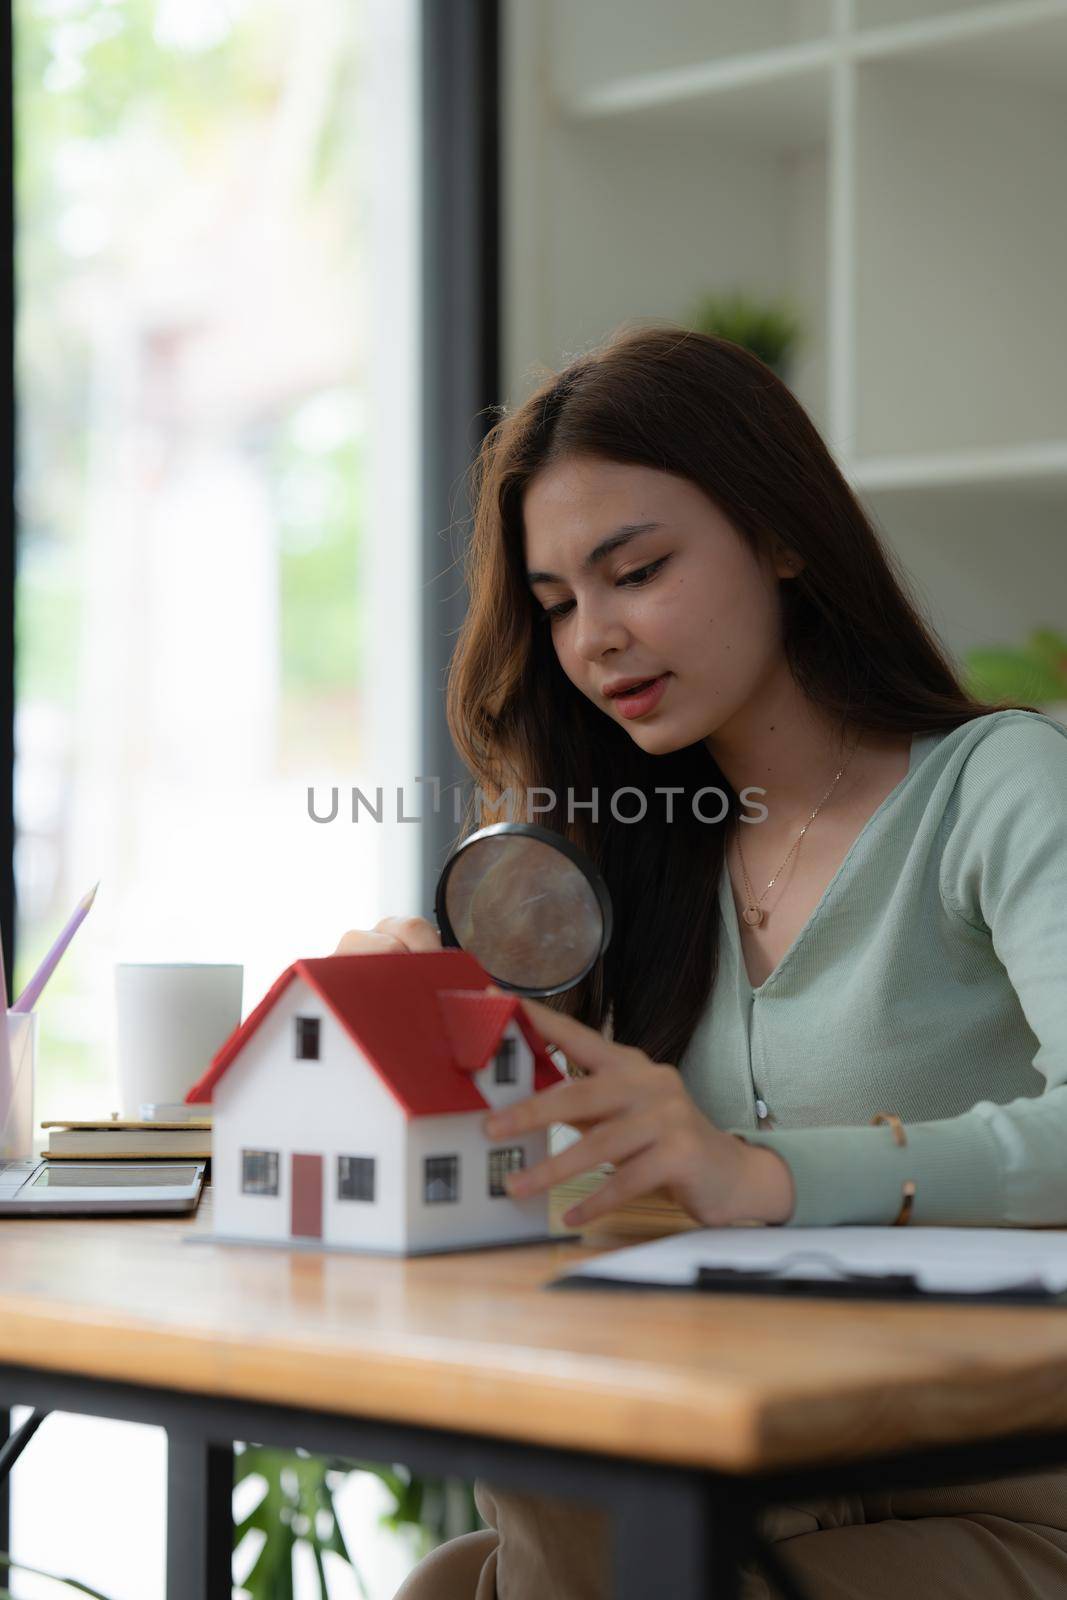 A woman holding magnifying glass and checking house model .Real Estate House Appraisal And Inspection concept